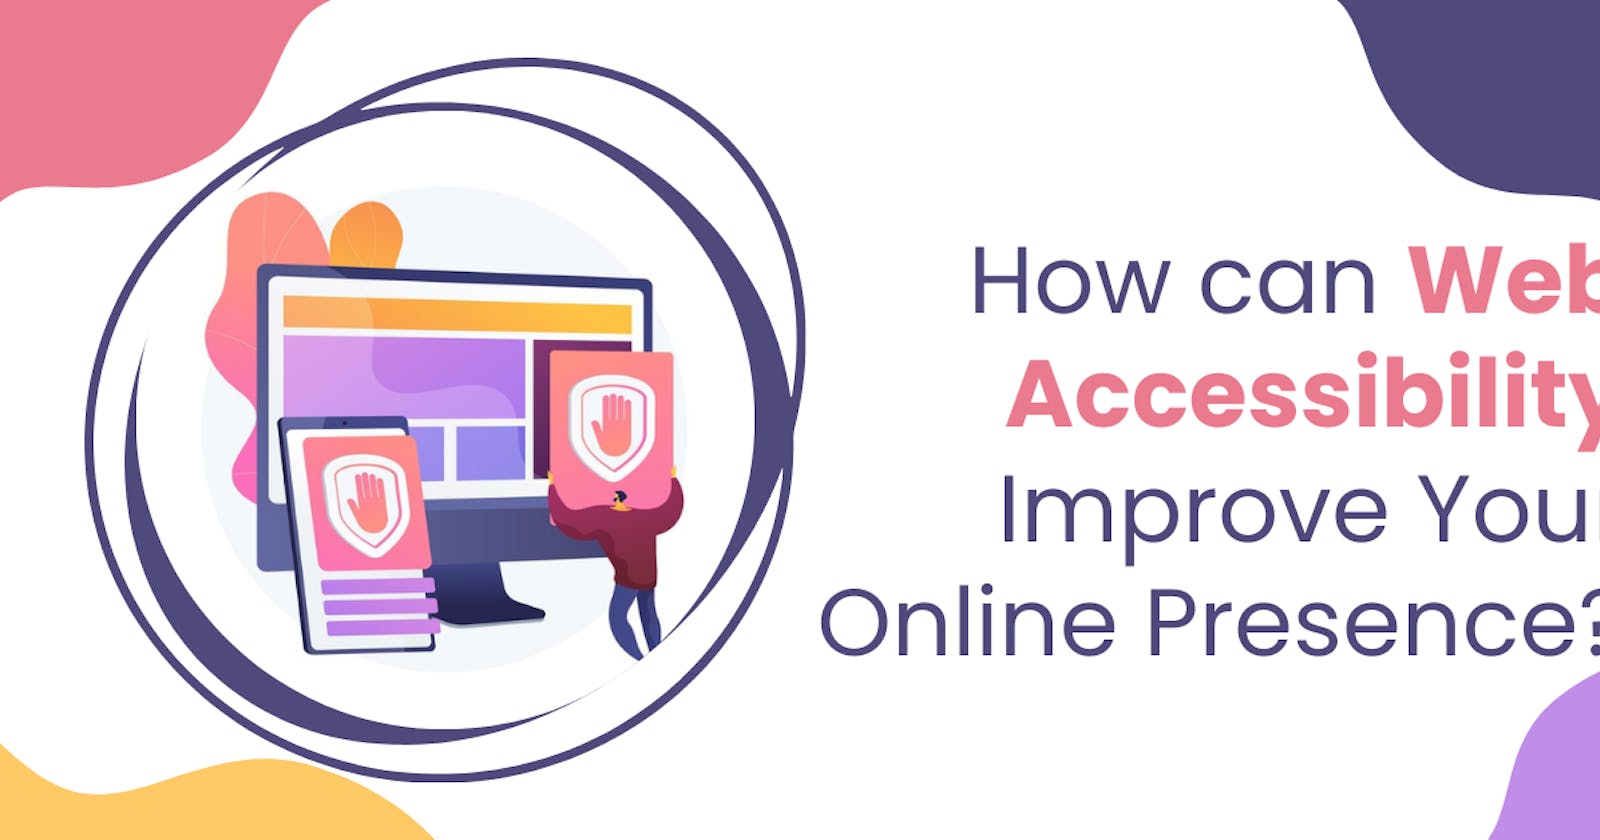 How can Web Accessibility Improve Your Online Presence?